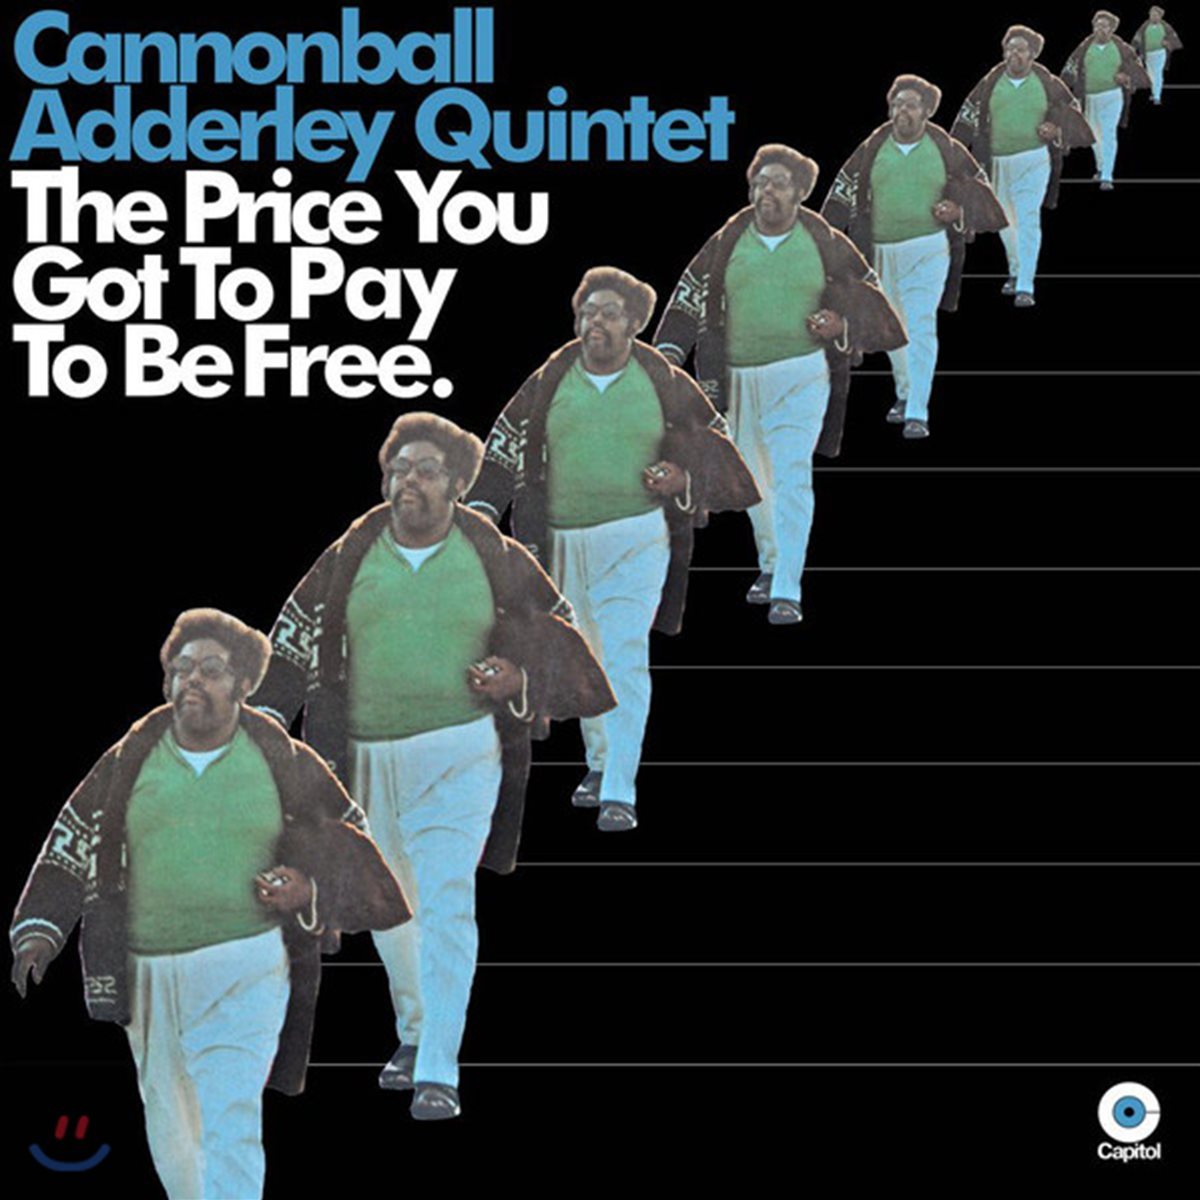 Cannonball Adderley Quintet (캐논볼 애덜리 퀸텟) - The Price You Got To Pay To Be Free